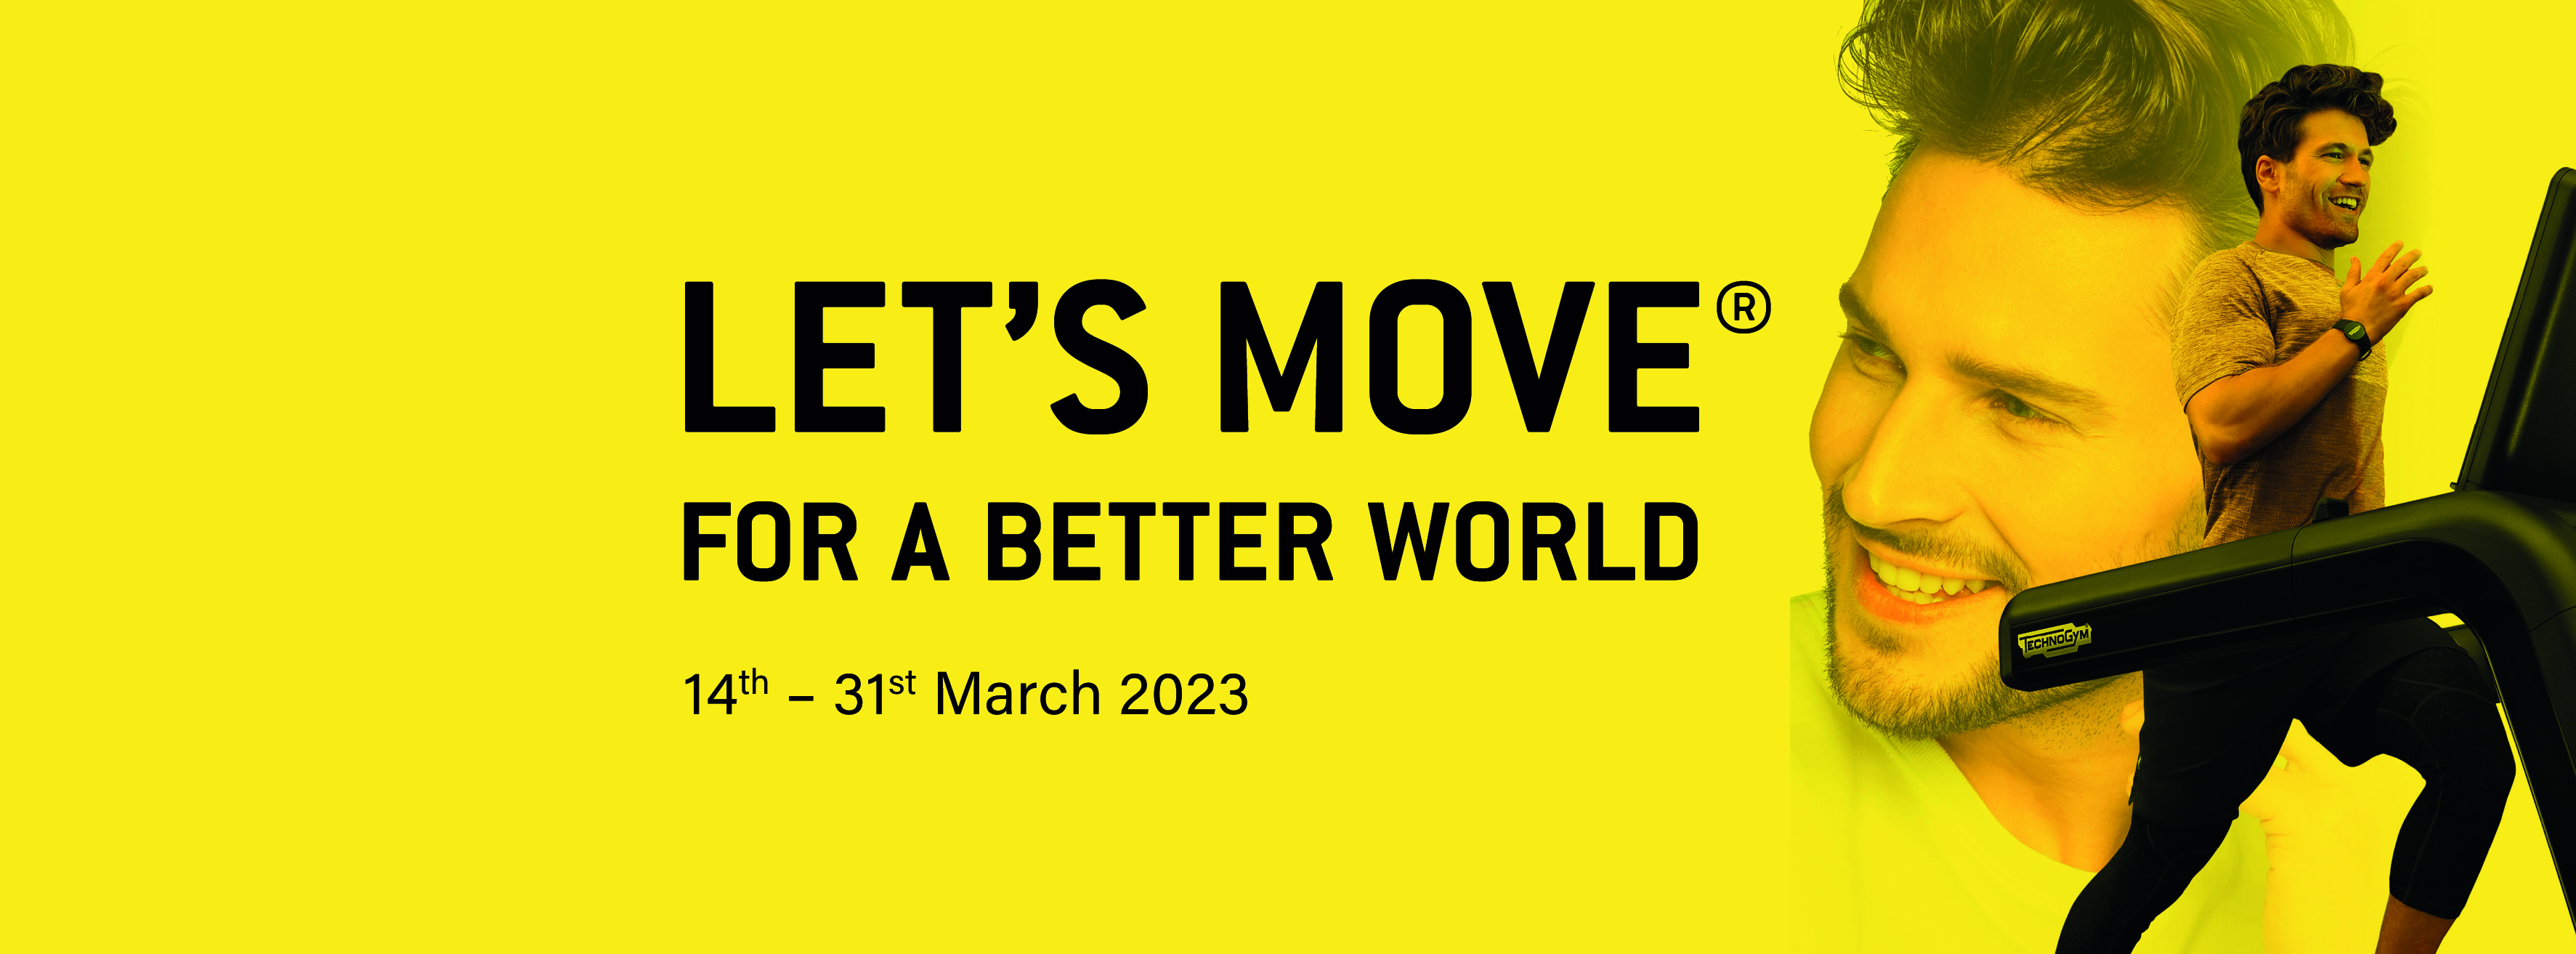 Let’s move for a better World 2023